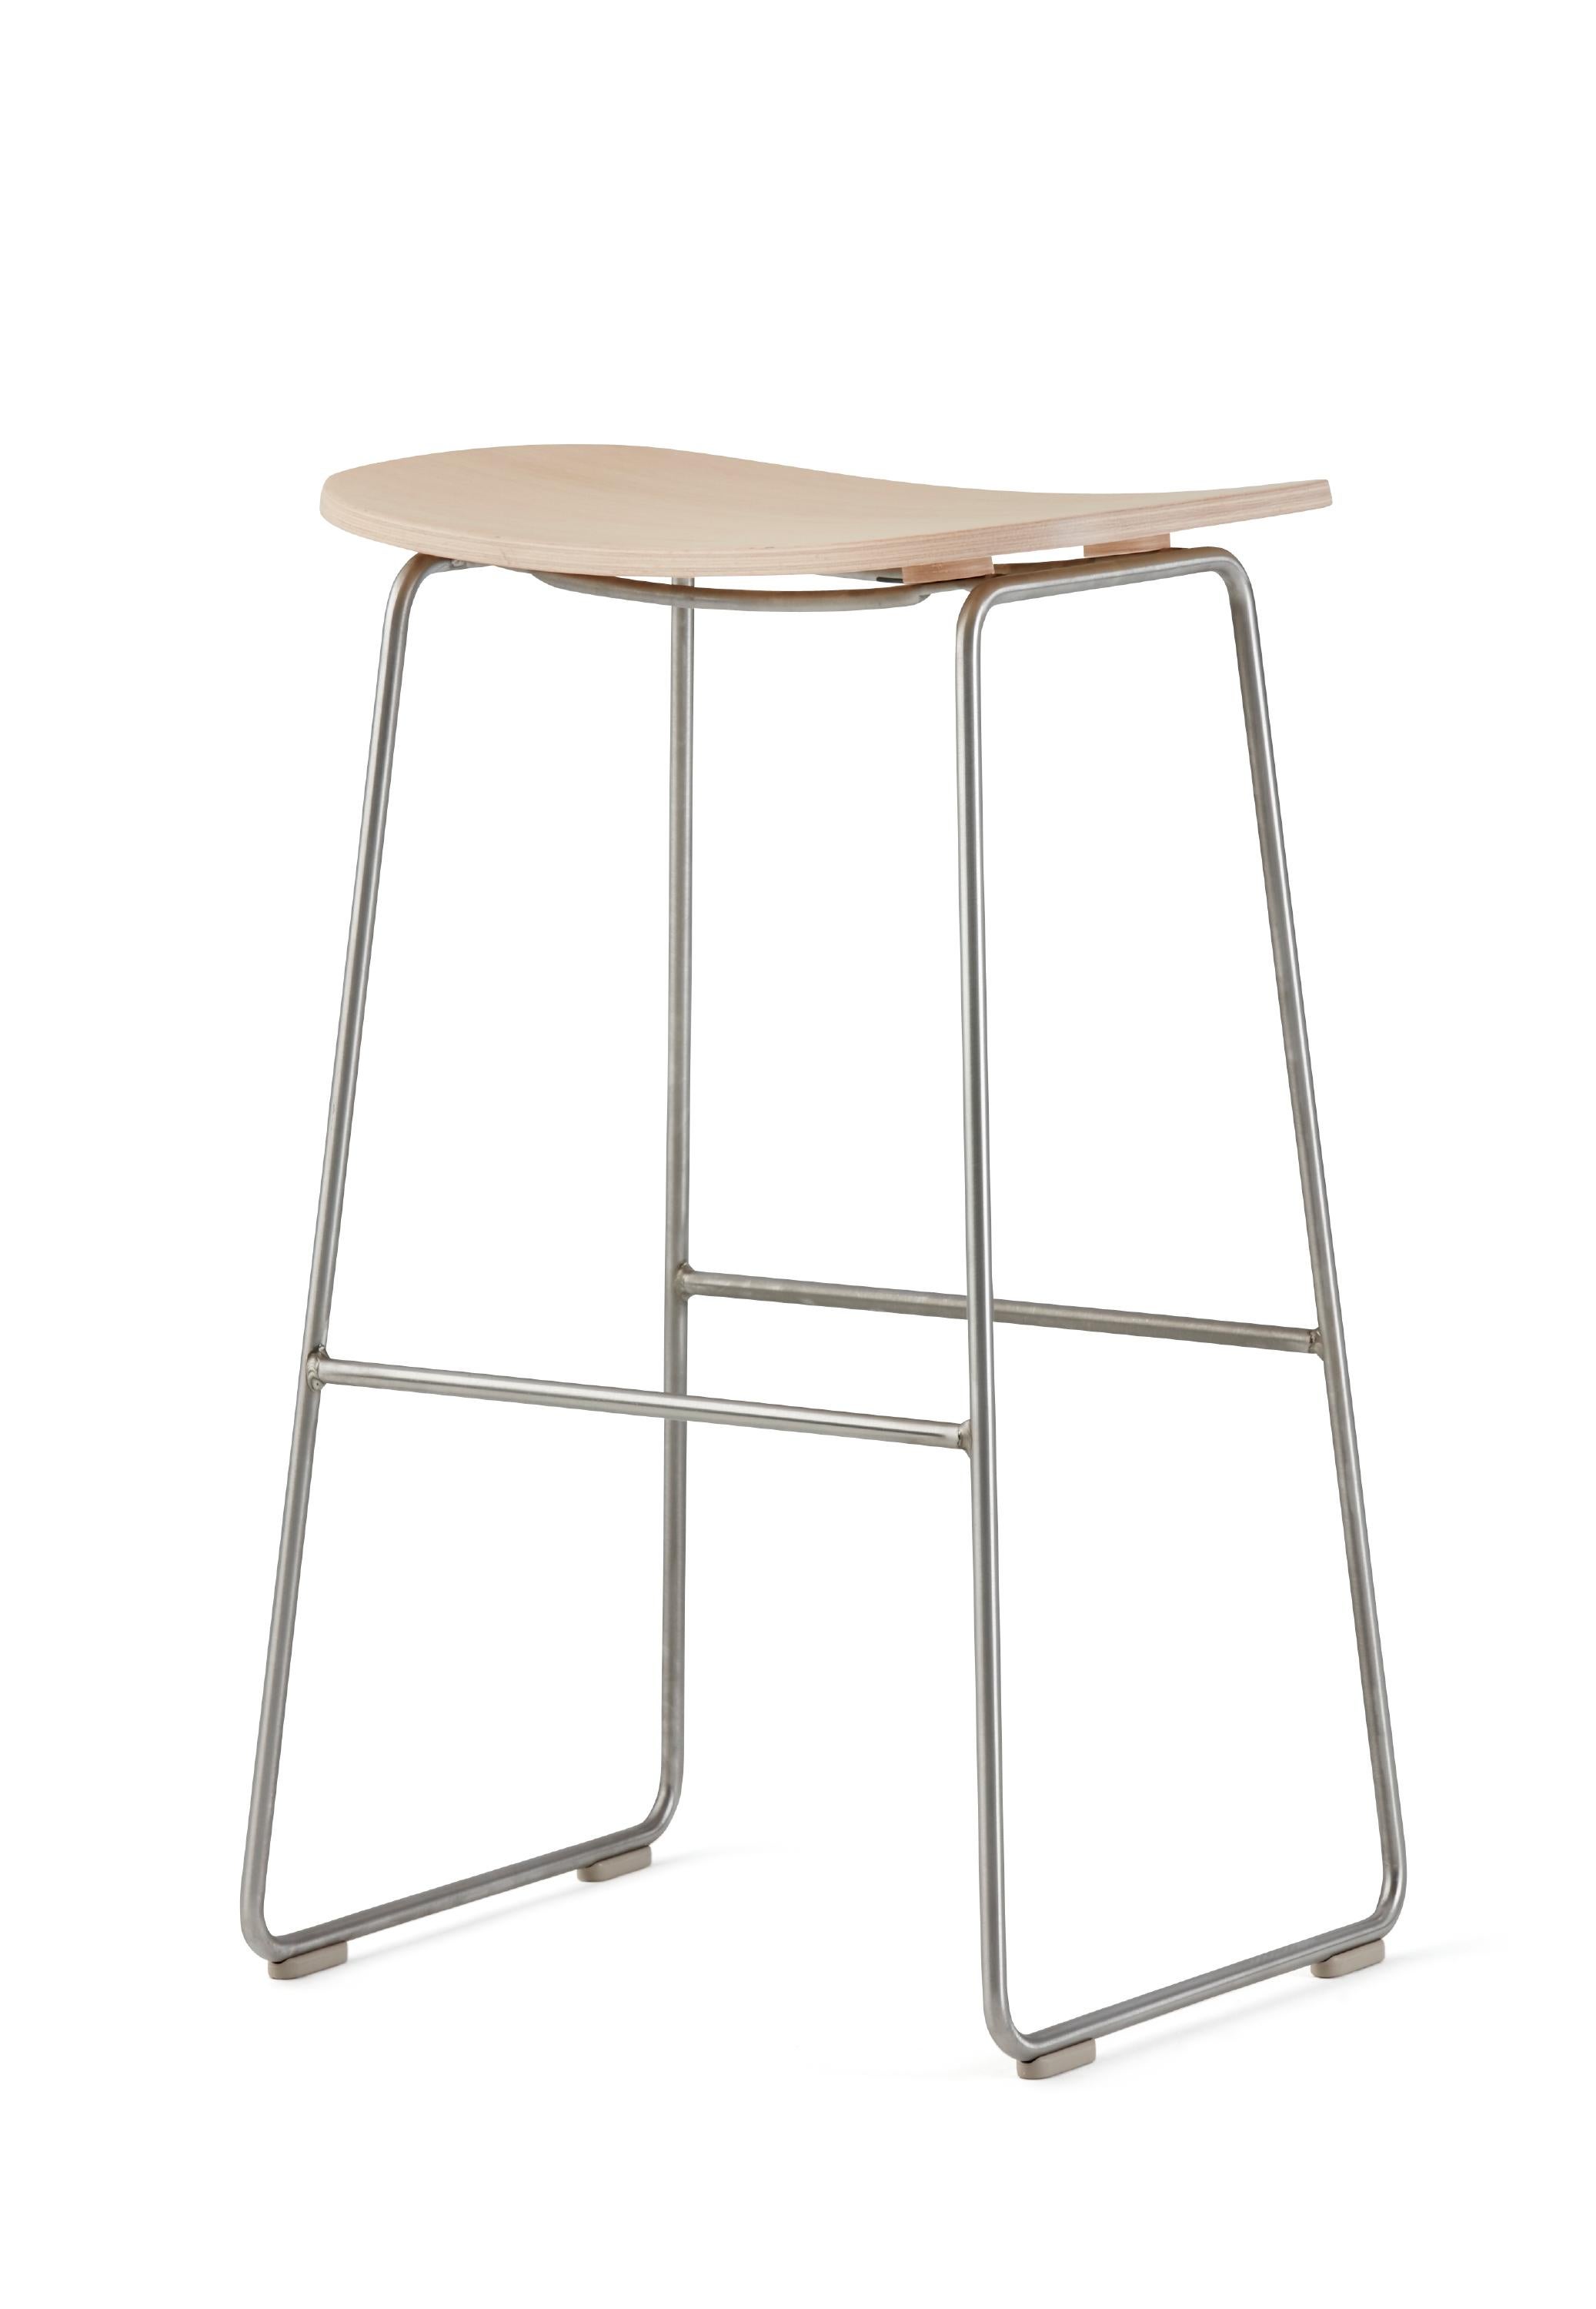 For Sale: Beige (113_Bleached Ash) Jasper Morrison Medium Morrison Stool in Ash and Fabric or Leather for 2